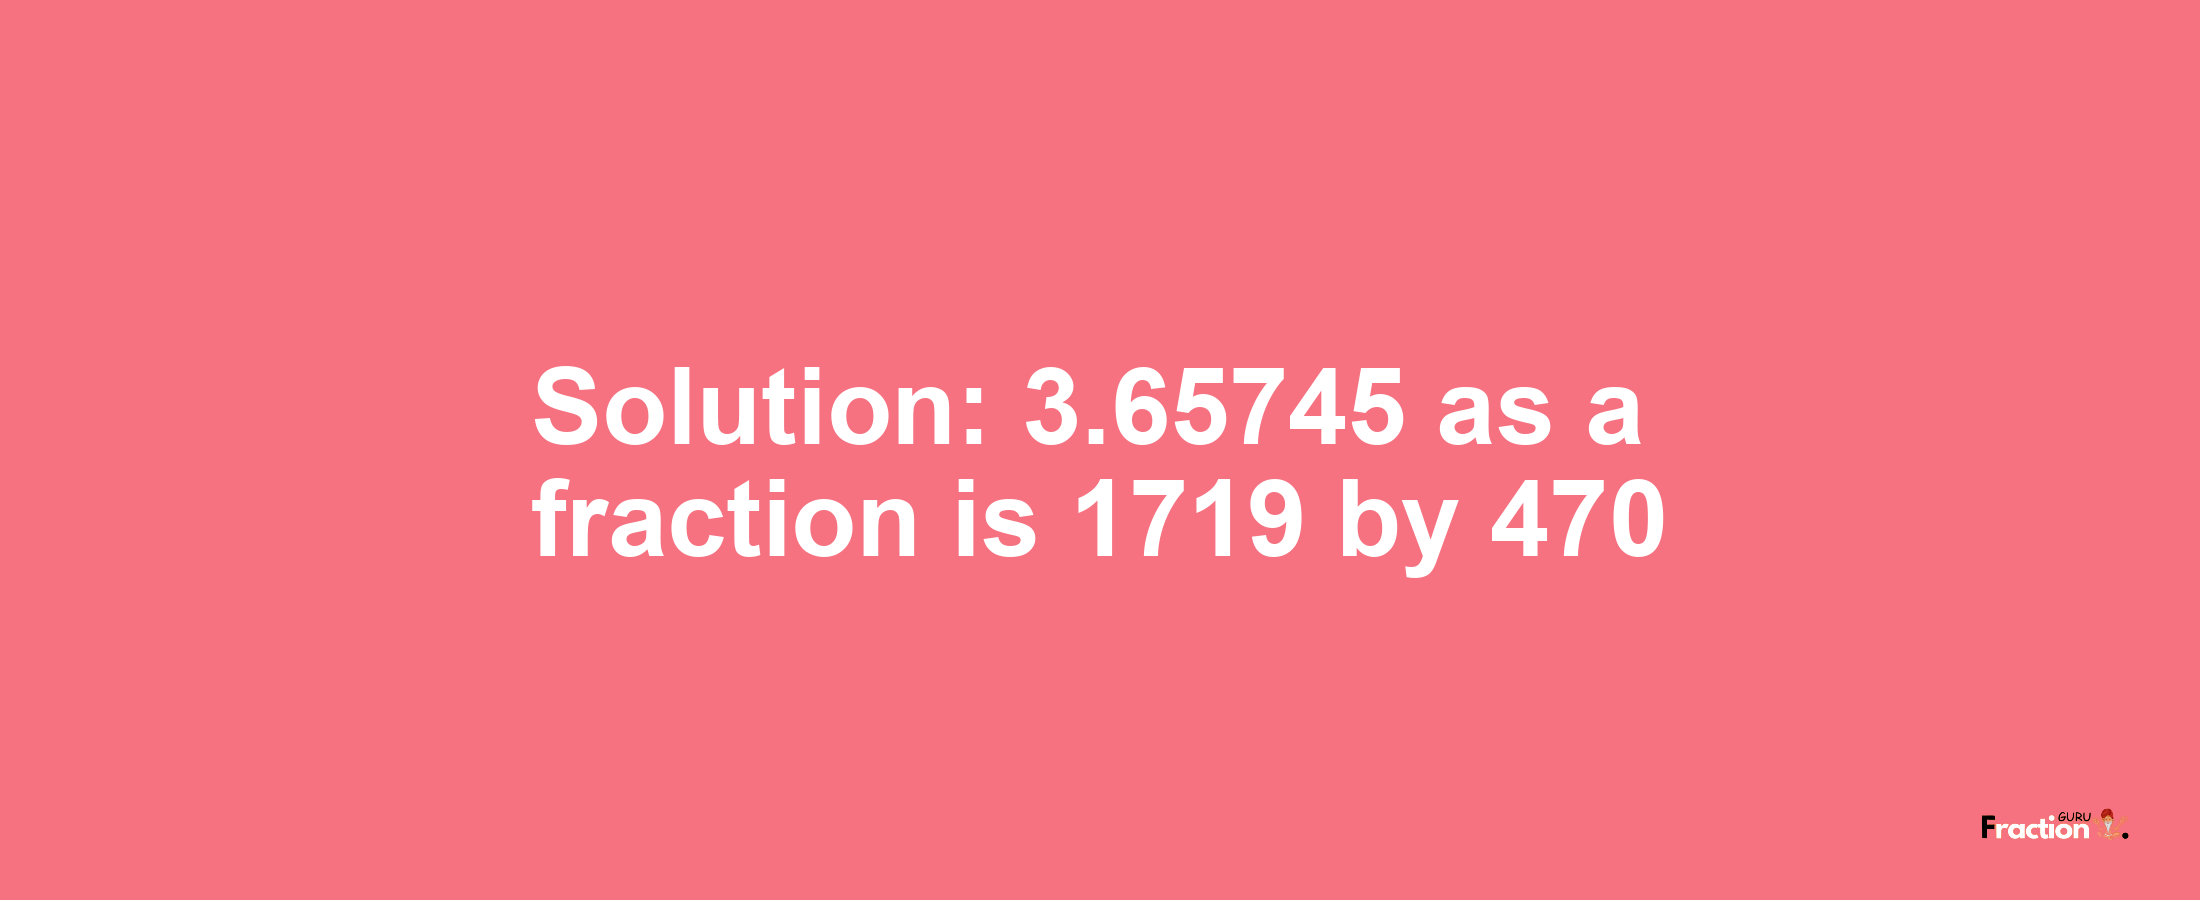 Solution:3.65745 as a fraction is 1719/470